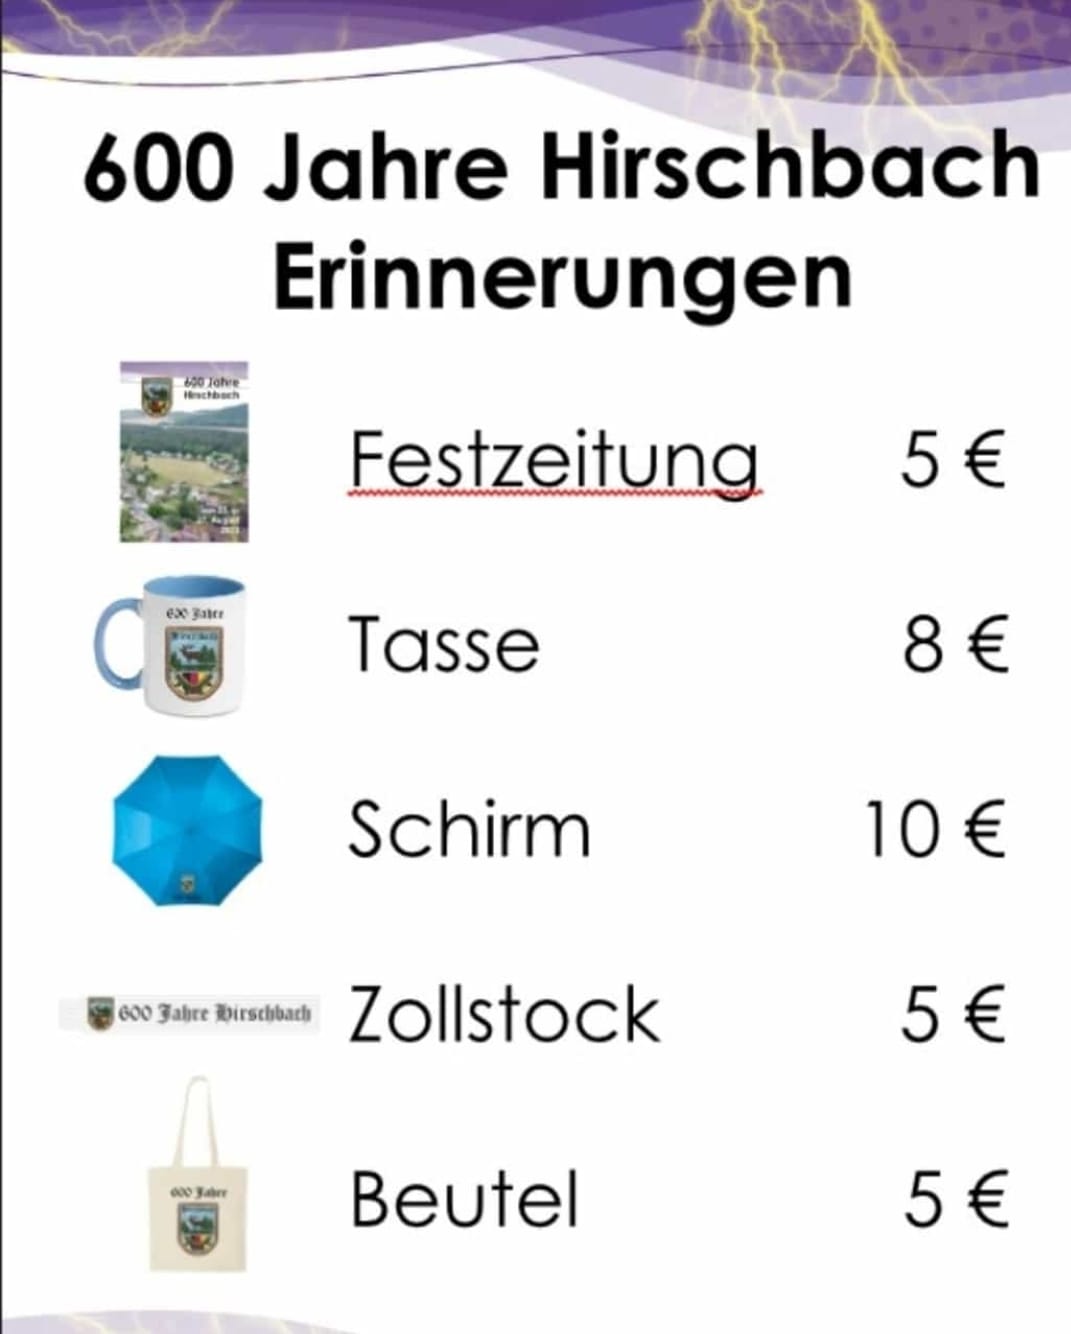 You are currently viewing Souvenirs 600 Jahre Hirschbach